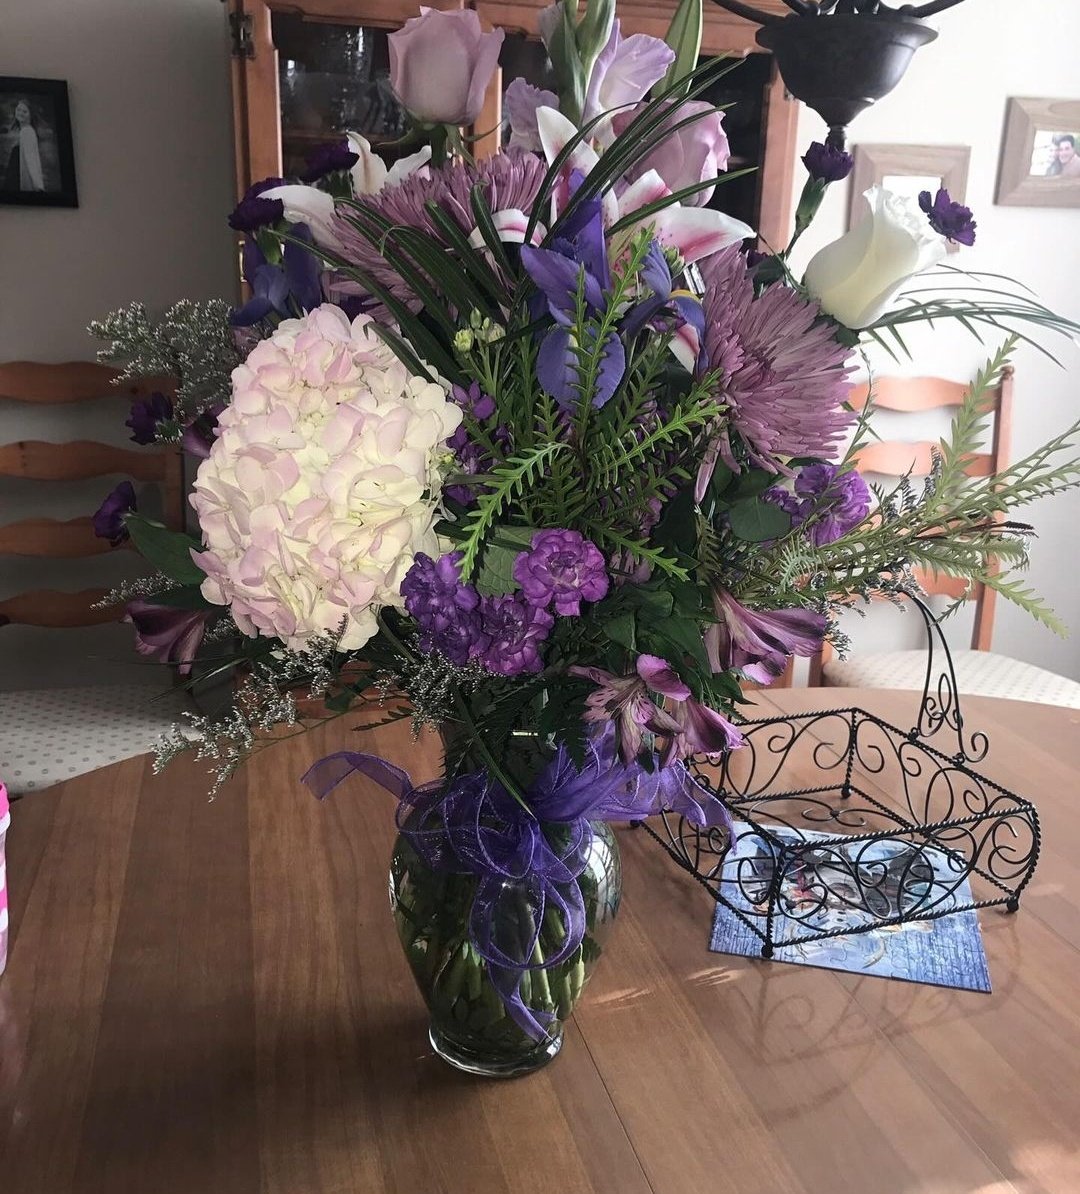 Father who died of #Cancer sends flowers from the grave. Year after year, the deceased man's daughter has received beautiful flowers, which must break her heart each time. The girl was only 16 when he died, but it's clear that this man's love will be with her, always. 🔐